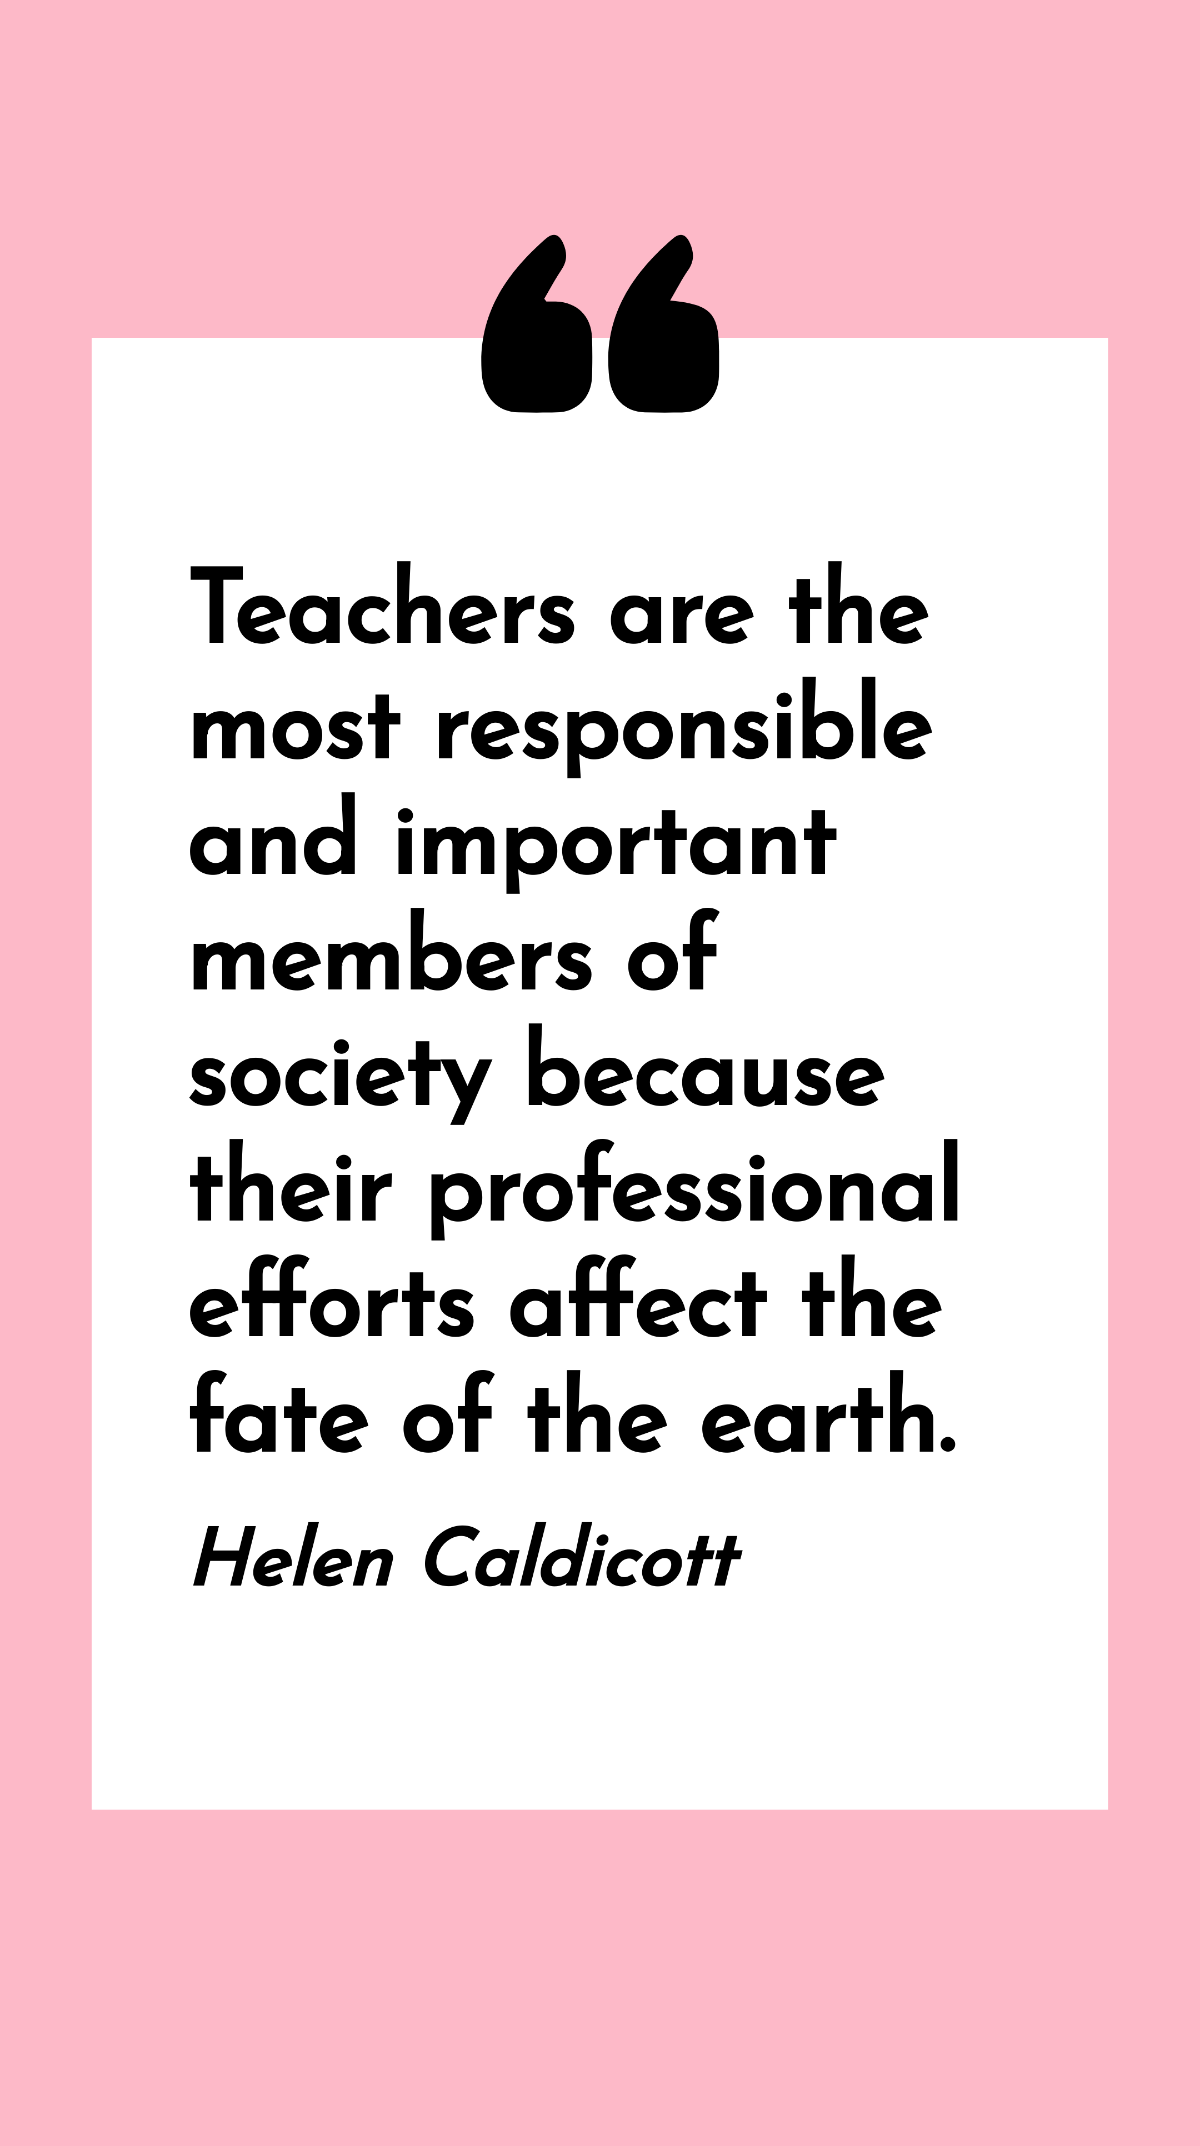 Helen Caldicott - Teachers are the most responsible and important members of society because their professional efforts affect the fate of the earth. Template